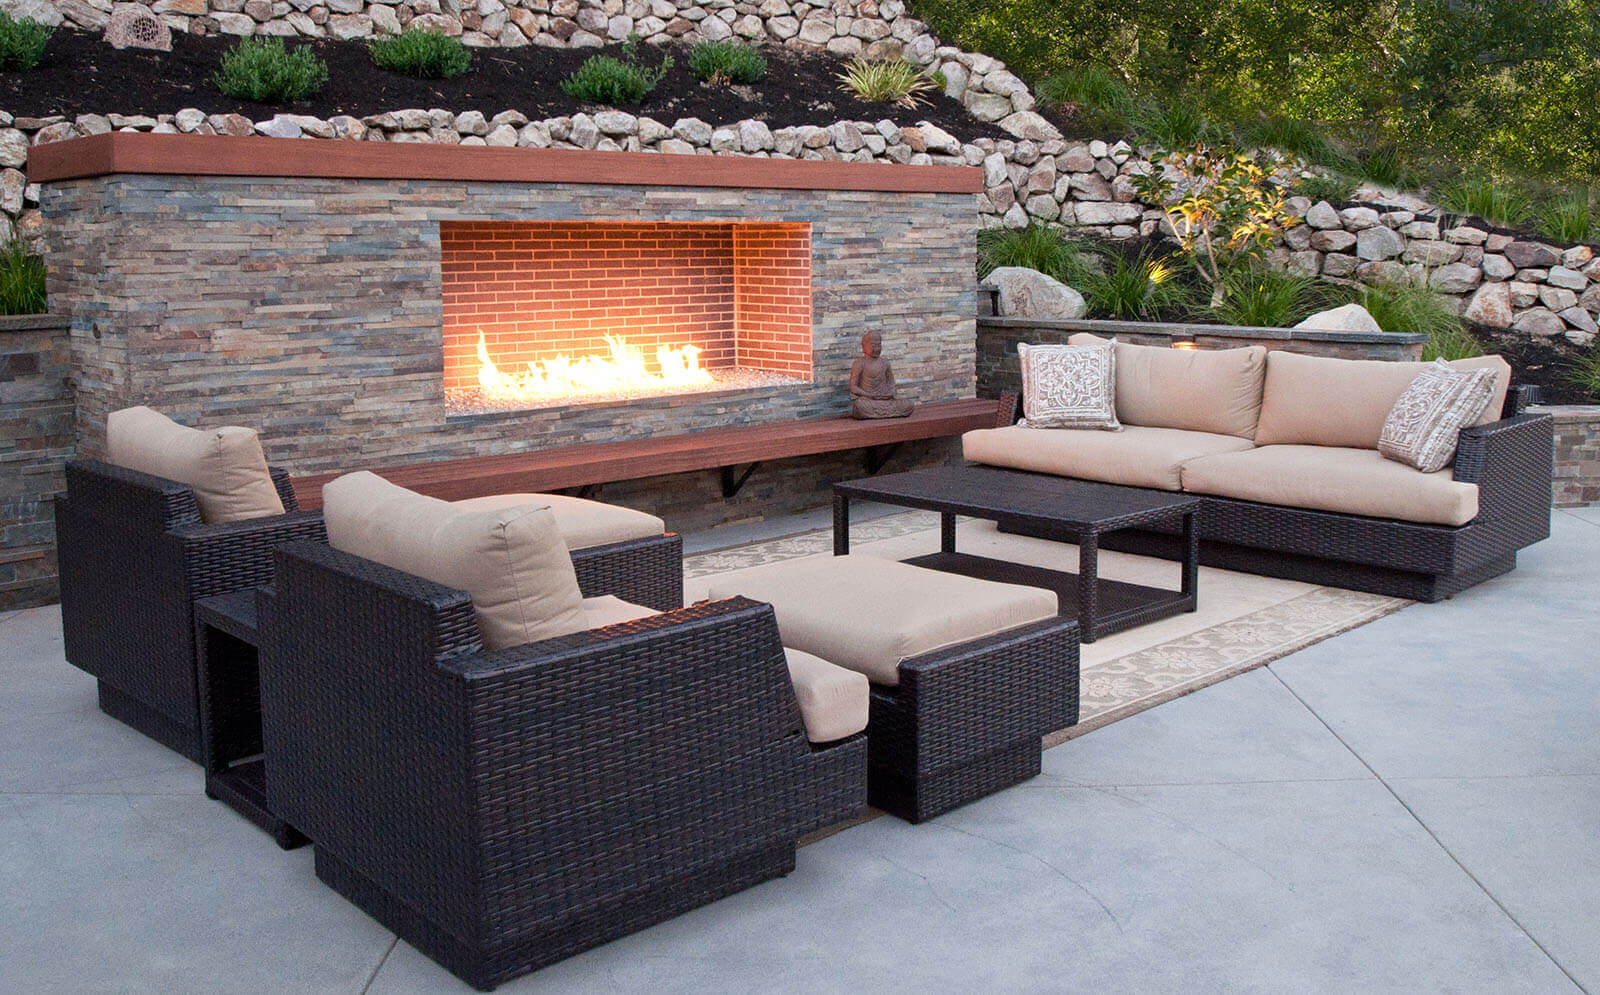 Contemporary bluestone and brick fireplace with crushed glass, wooden mantel and hearth, and outdoor lounge